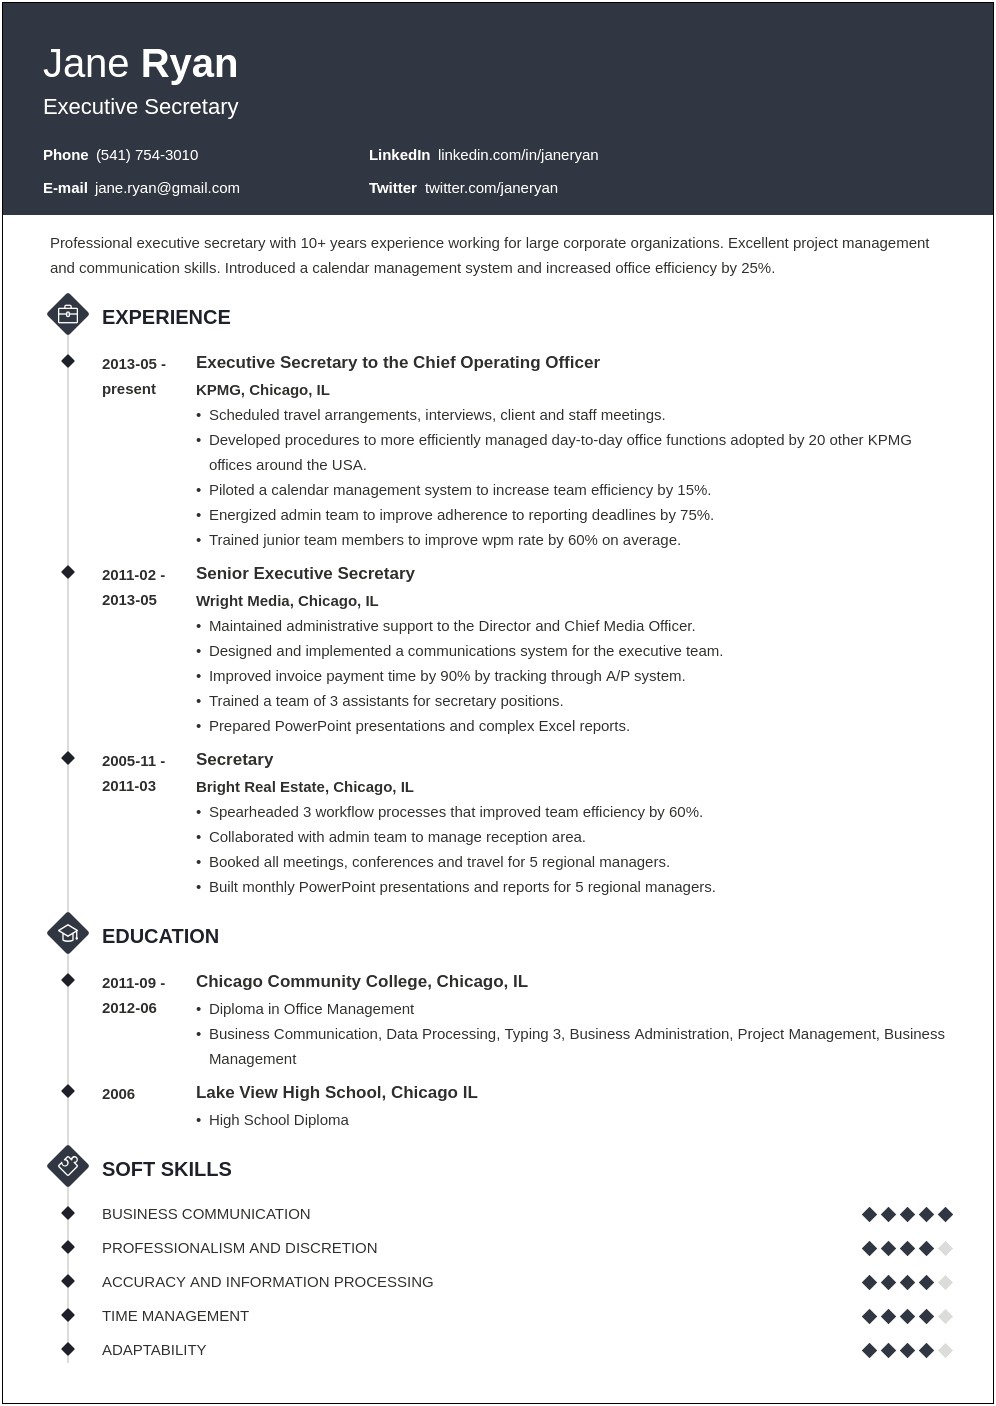 Resume Objective Examples For Secretary Position